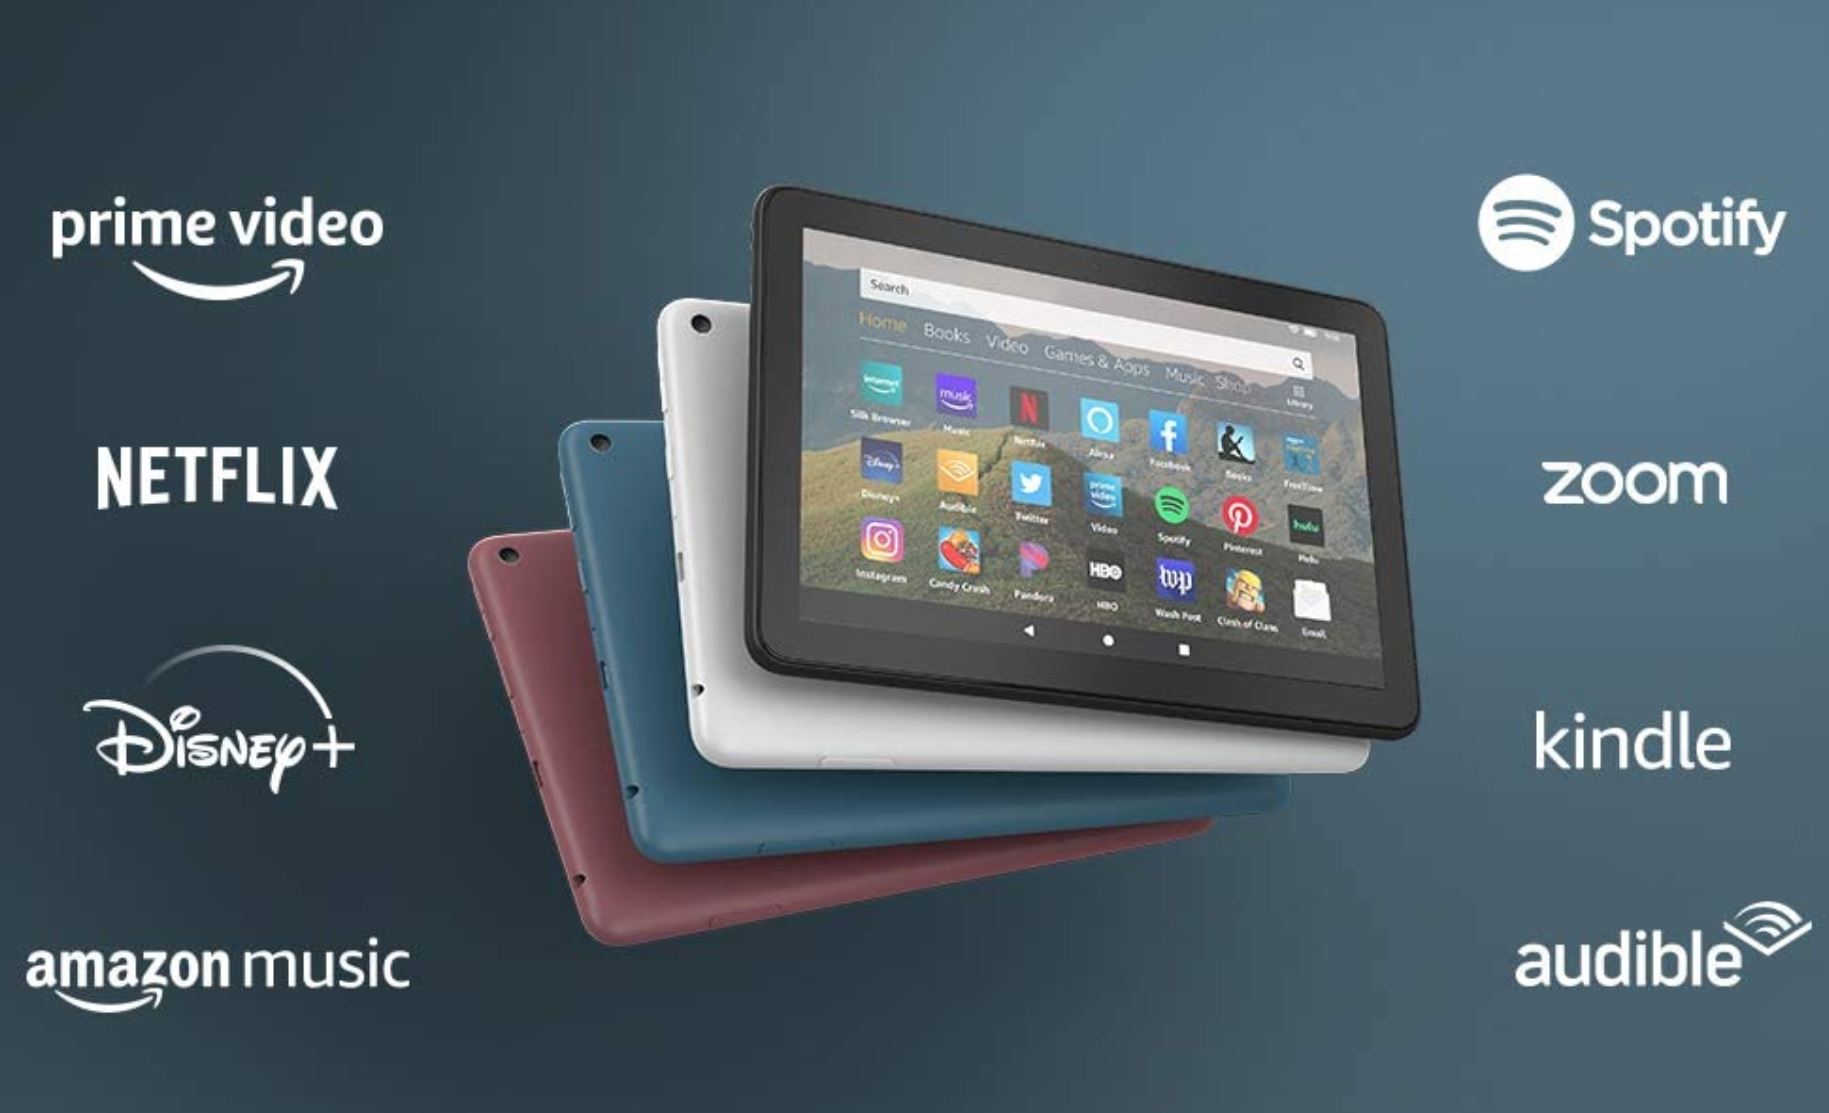 Deal Alert: Amazon Fire HD 8 tablet is $30 cheaper today